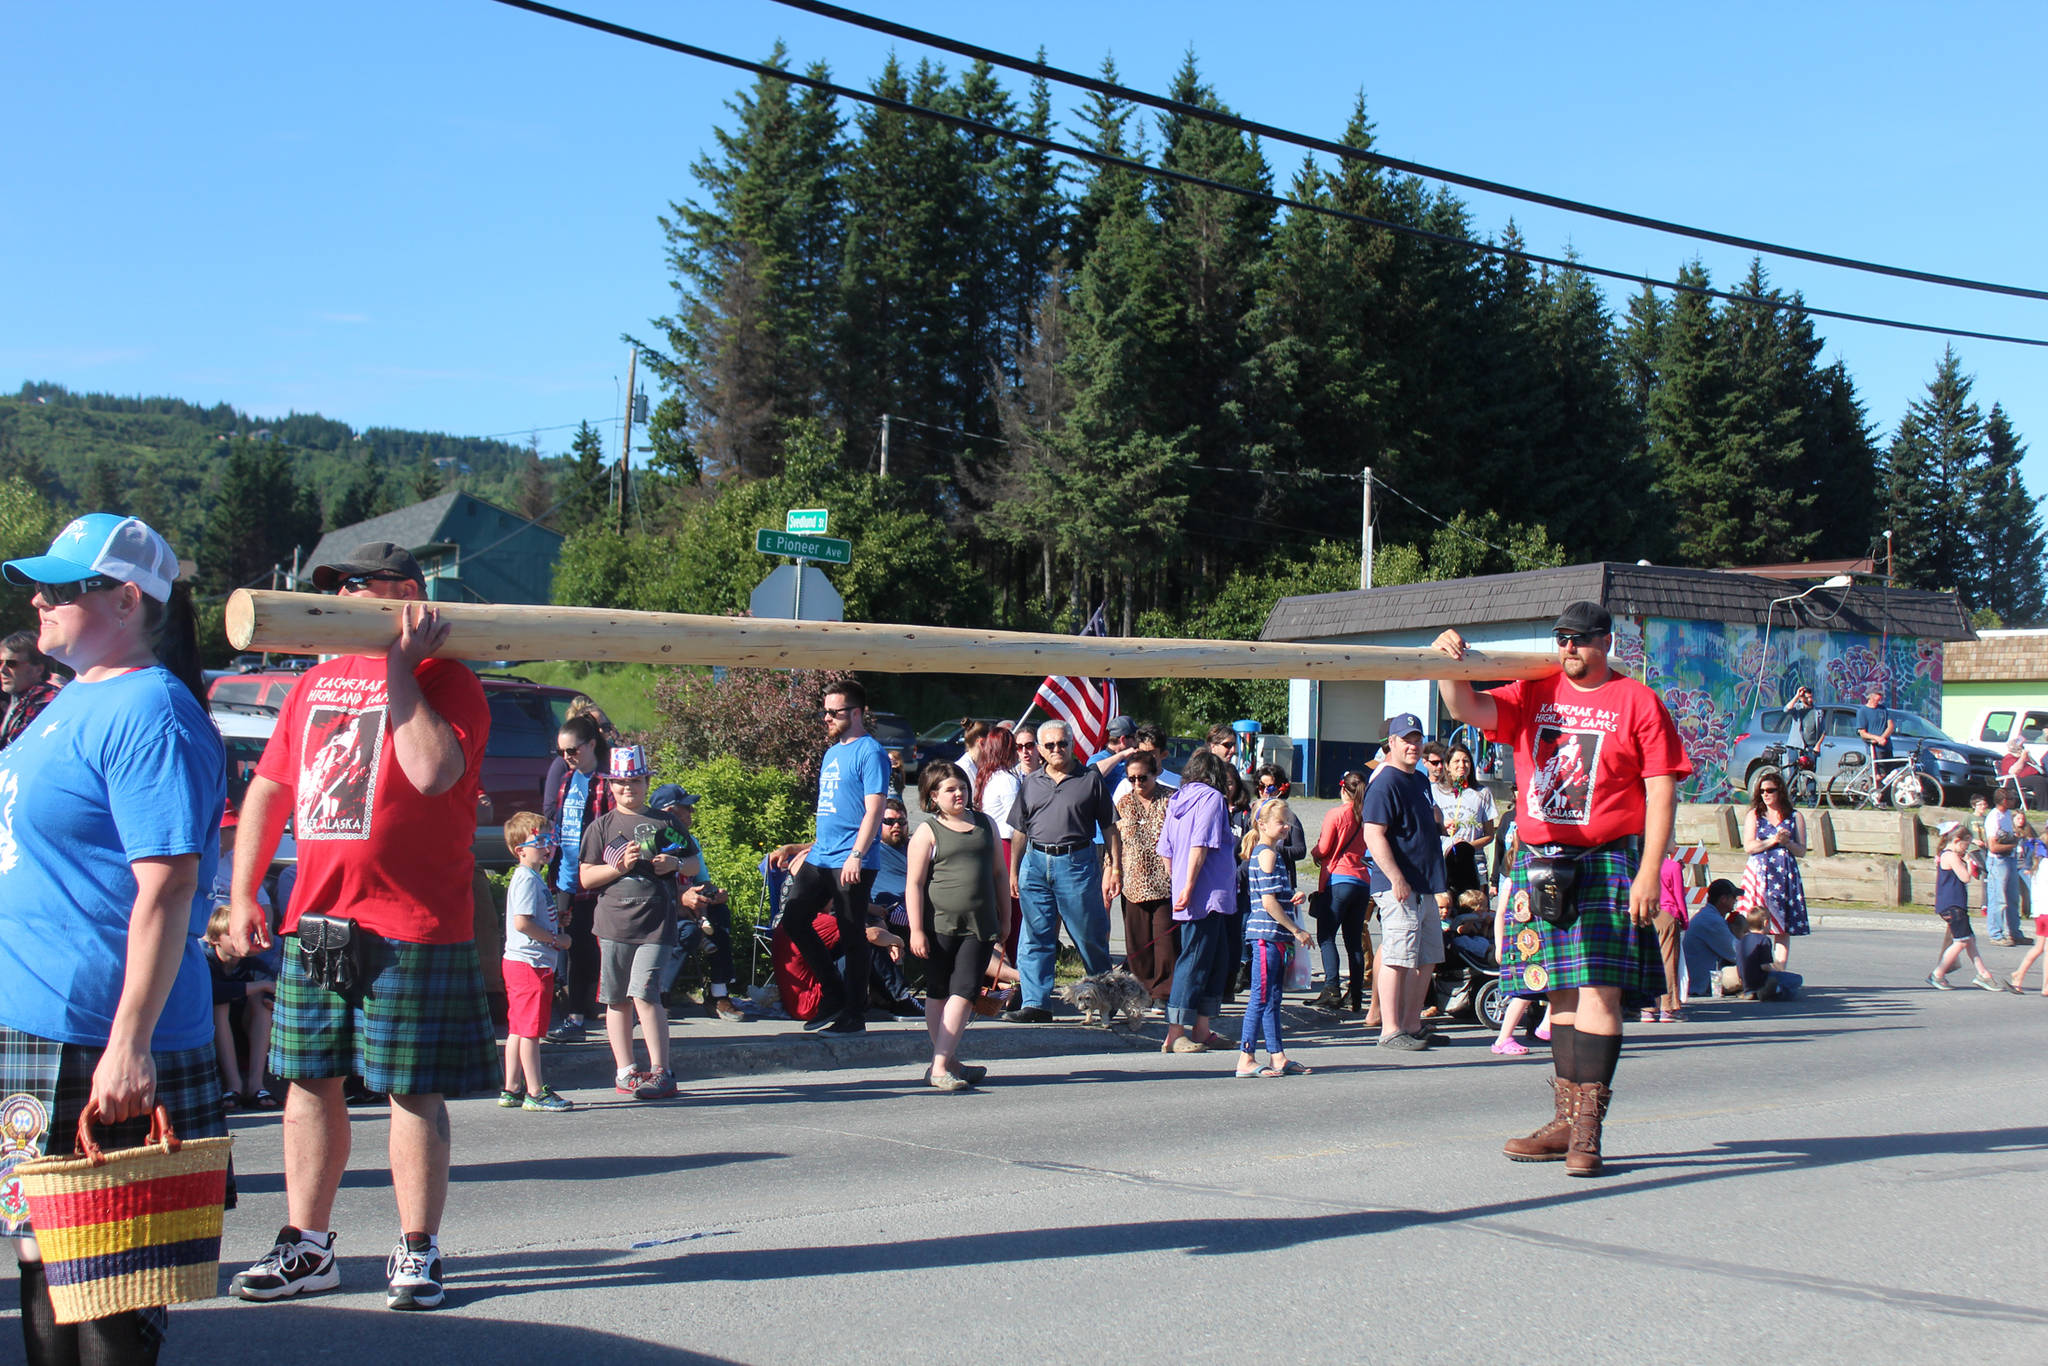 Two men carry a caber — a type of log thrown during Scottish highland games — during the annual Independence Day parade Wednesday, July 4, 2018 on Pioneer Avenue in Homer, Alaska. (Photo by Megan Pacer/Homer News)